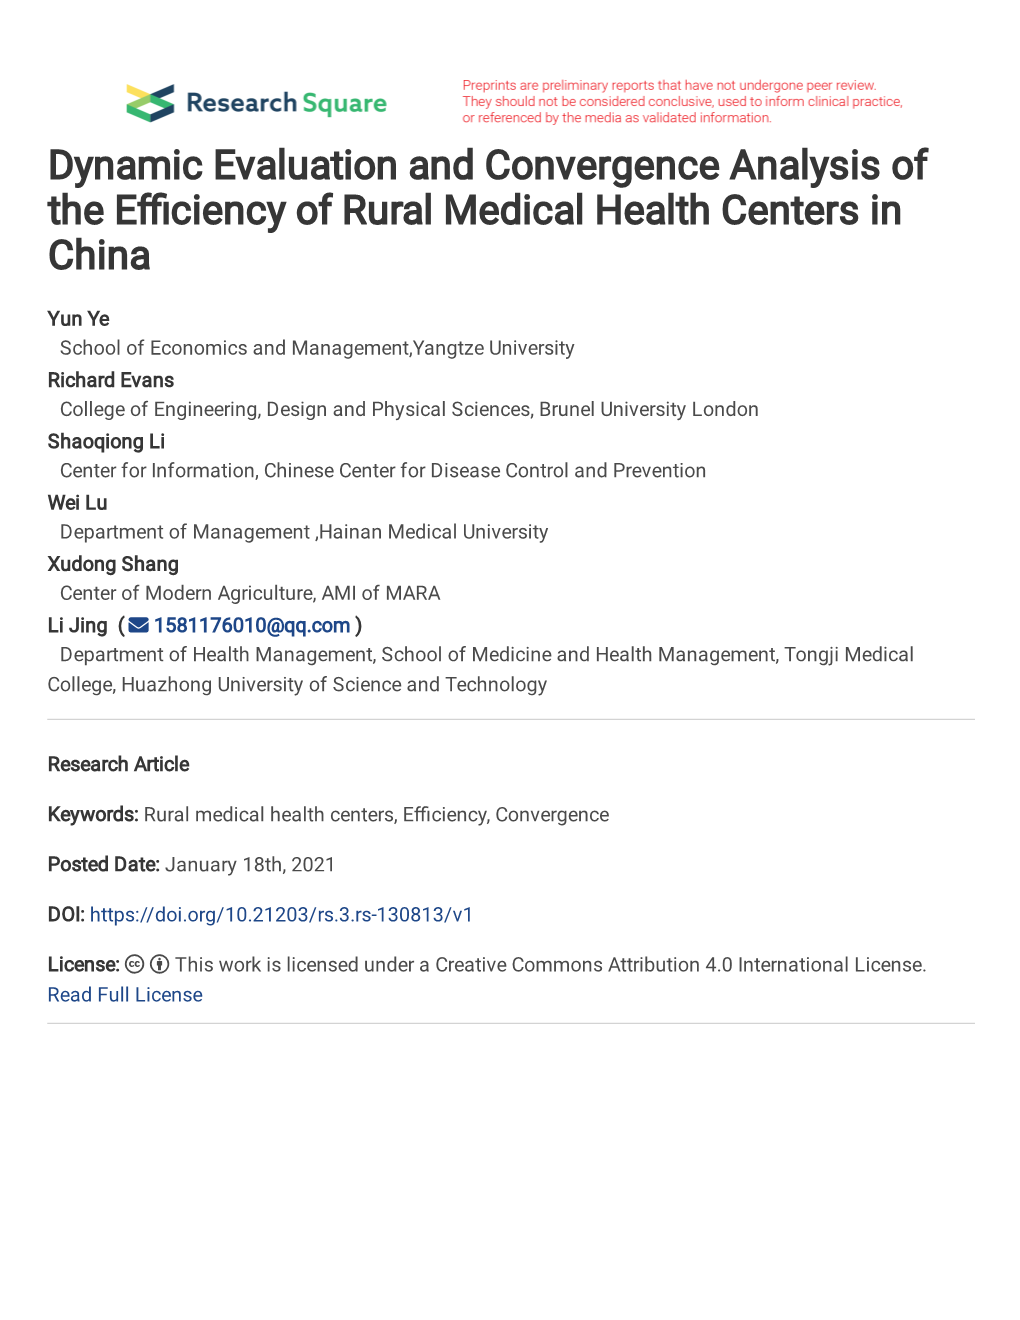 Dynamic Evaluation and Convergence Analysis of the E Ciency of Rural Medical Health Centers in China